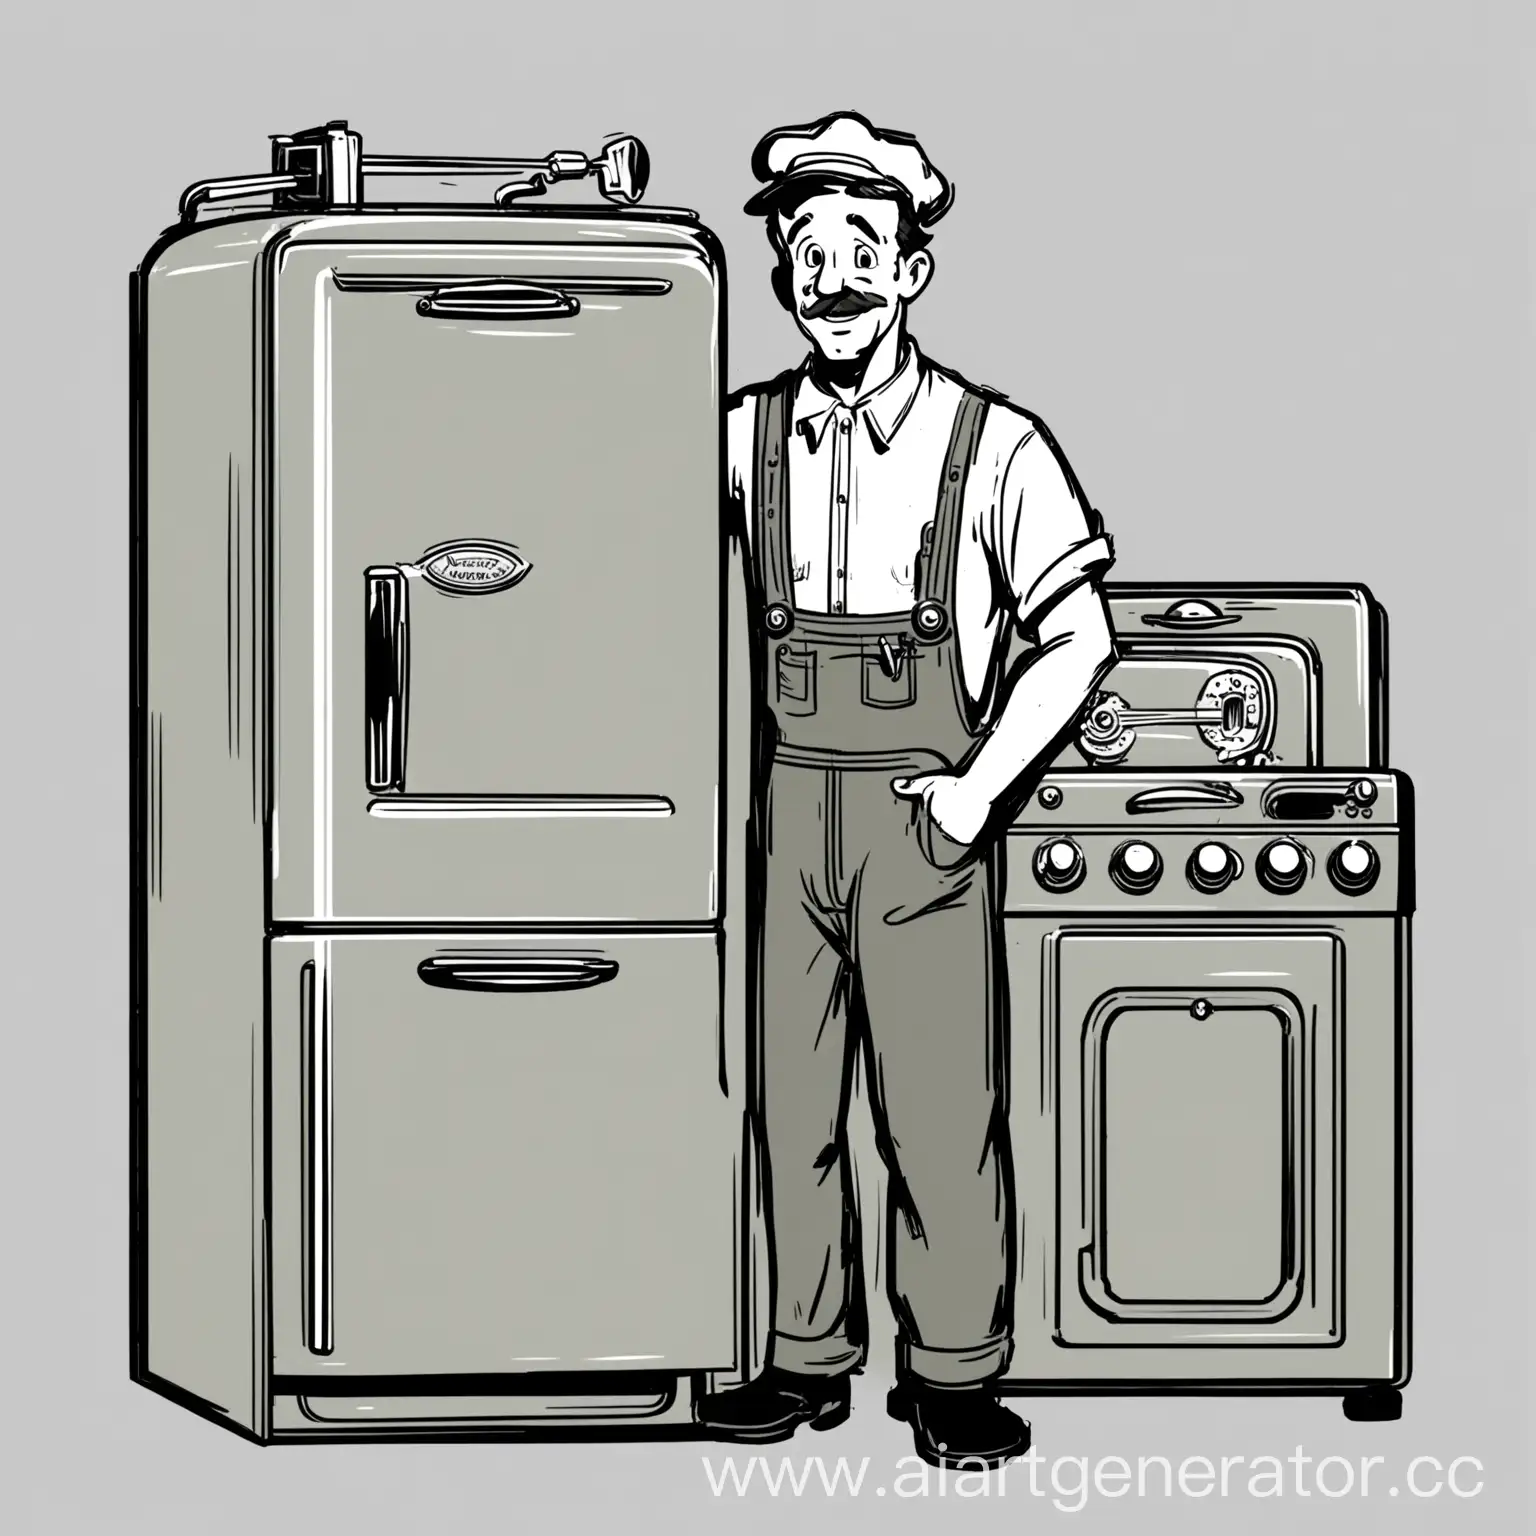 Friendly-DisneyStyle-1930s-Appliance-Repairman-with-Toolbox-and-Wrench